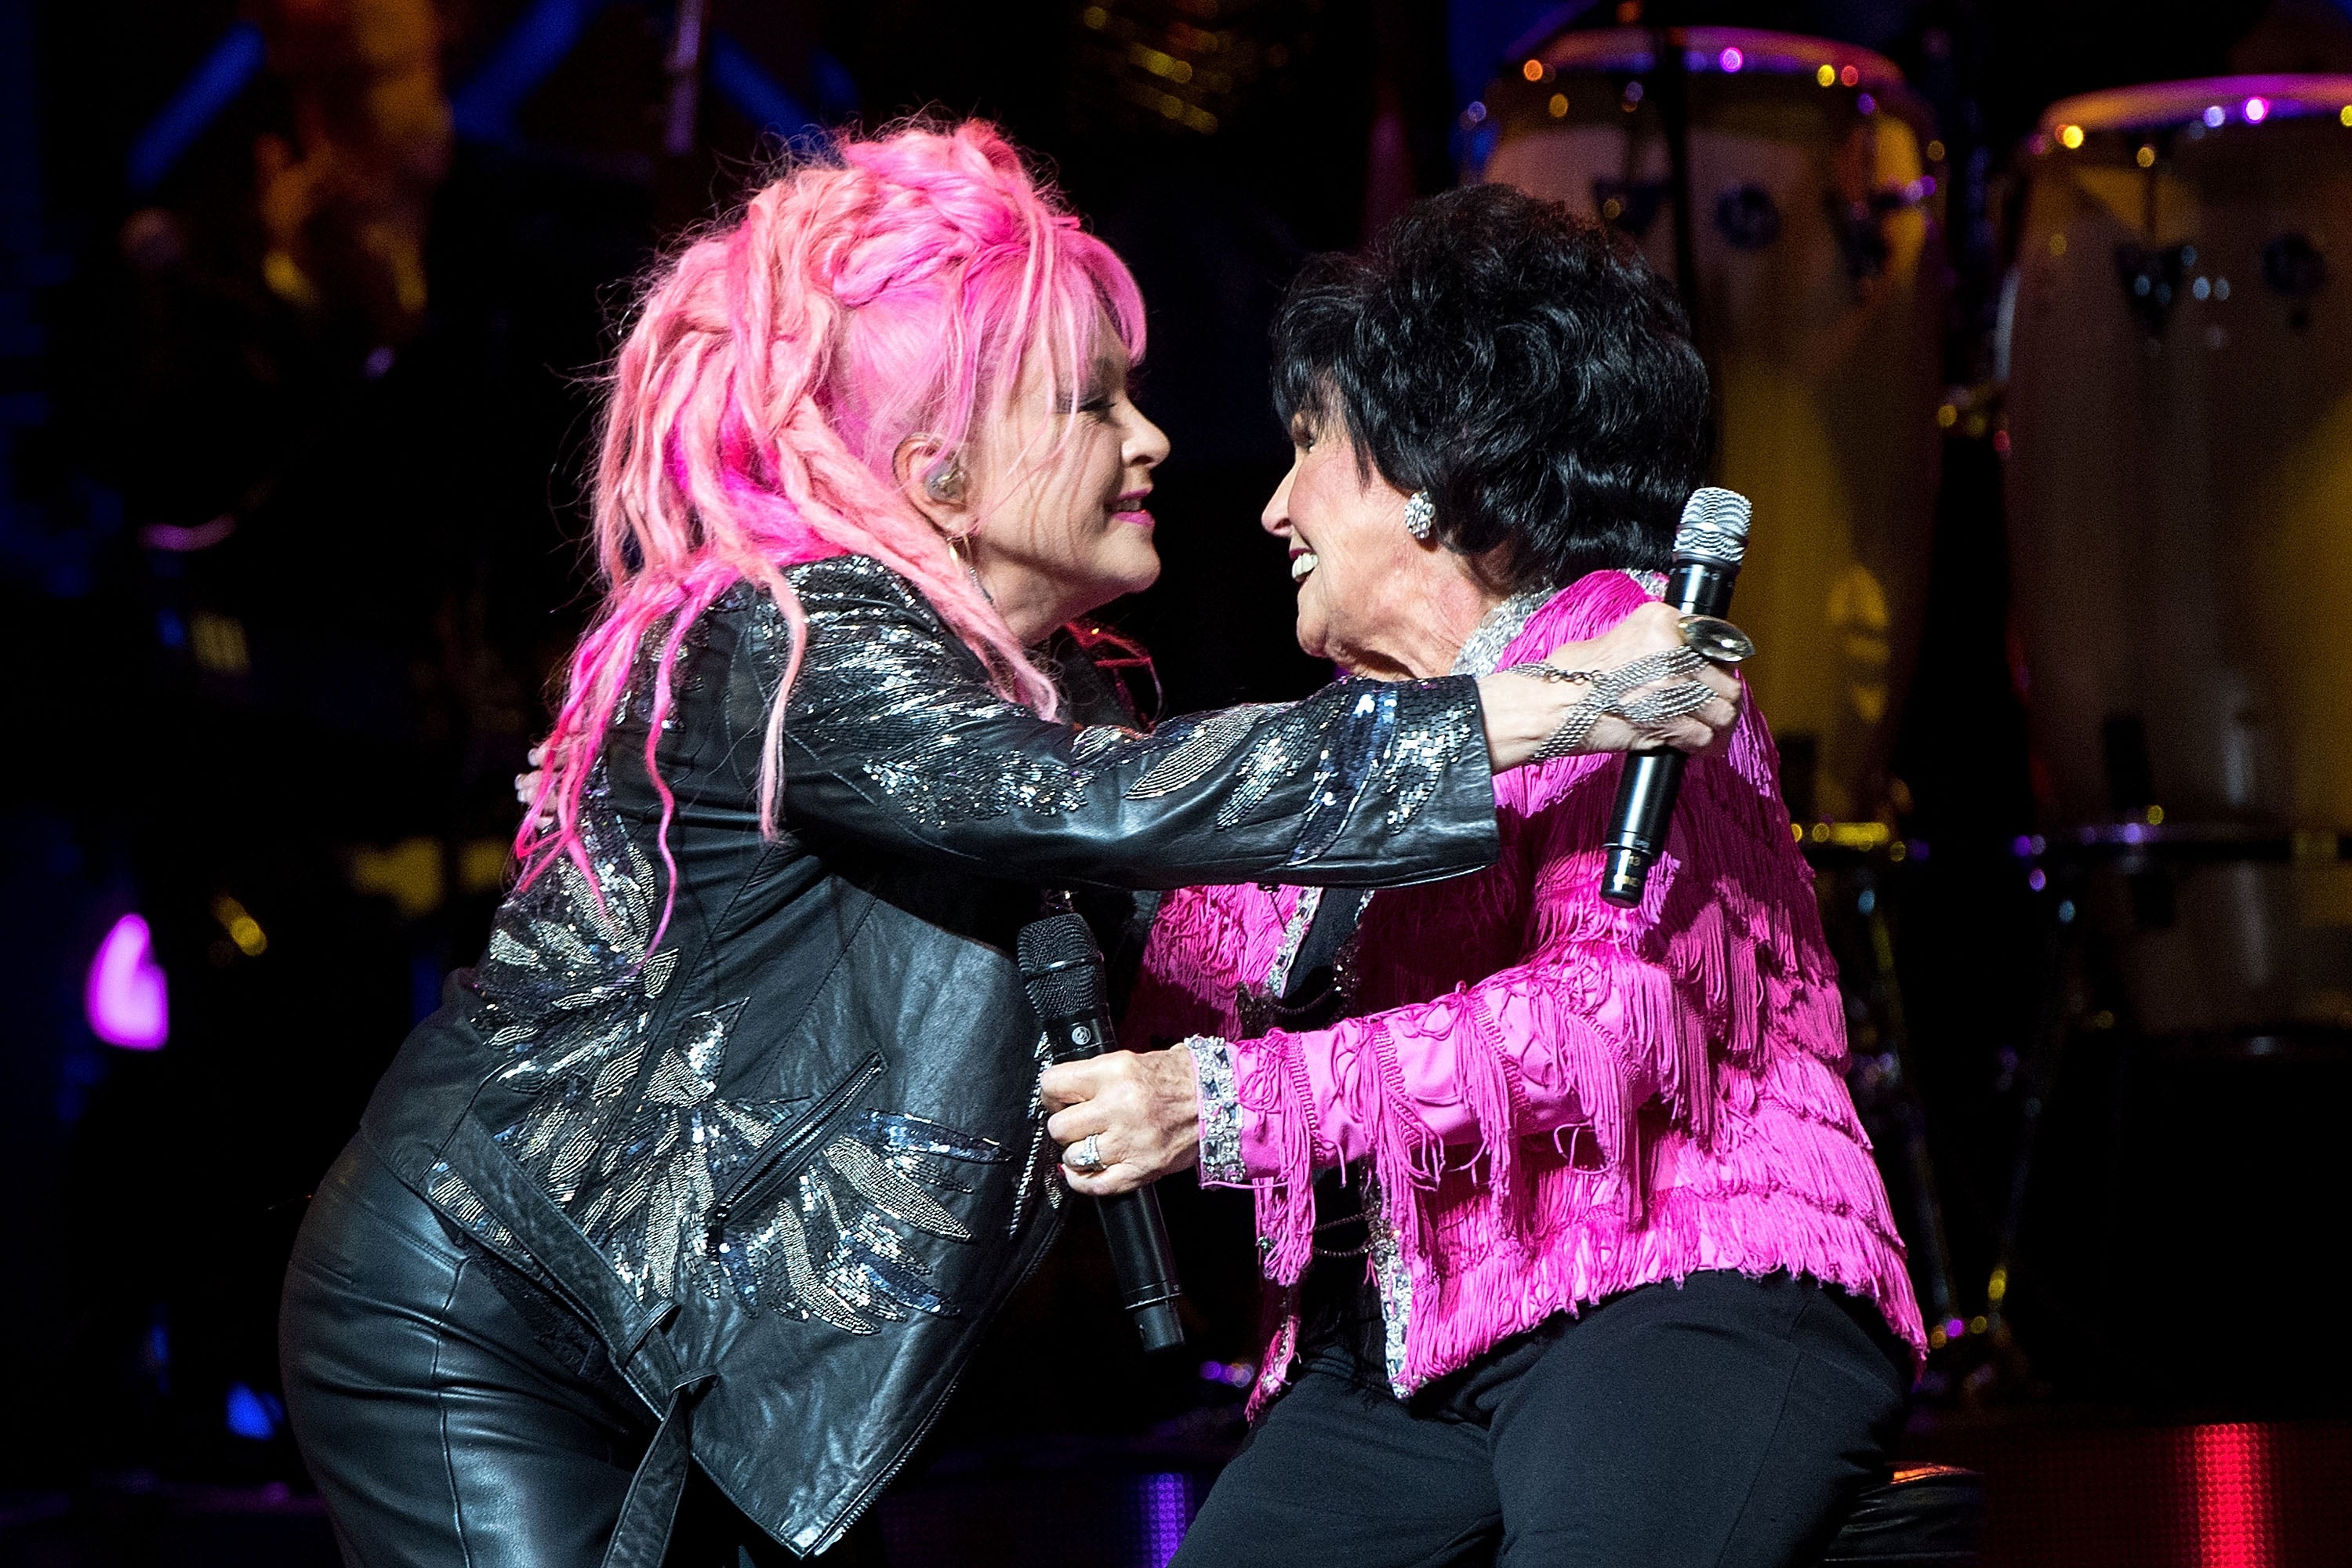 Cyndi Lauper and Wanda Jackson perform at the America Salutes You concert in 2016